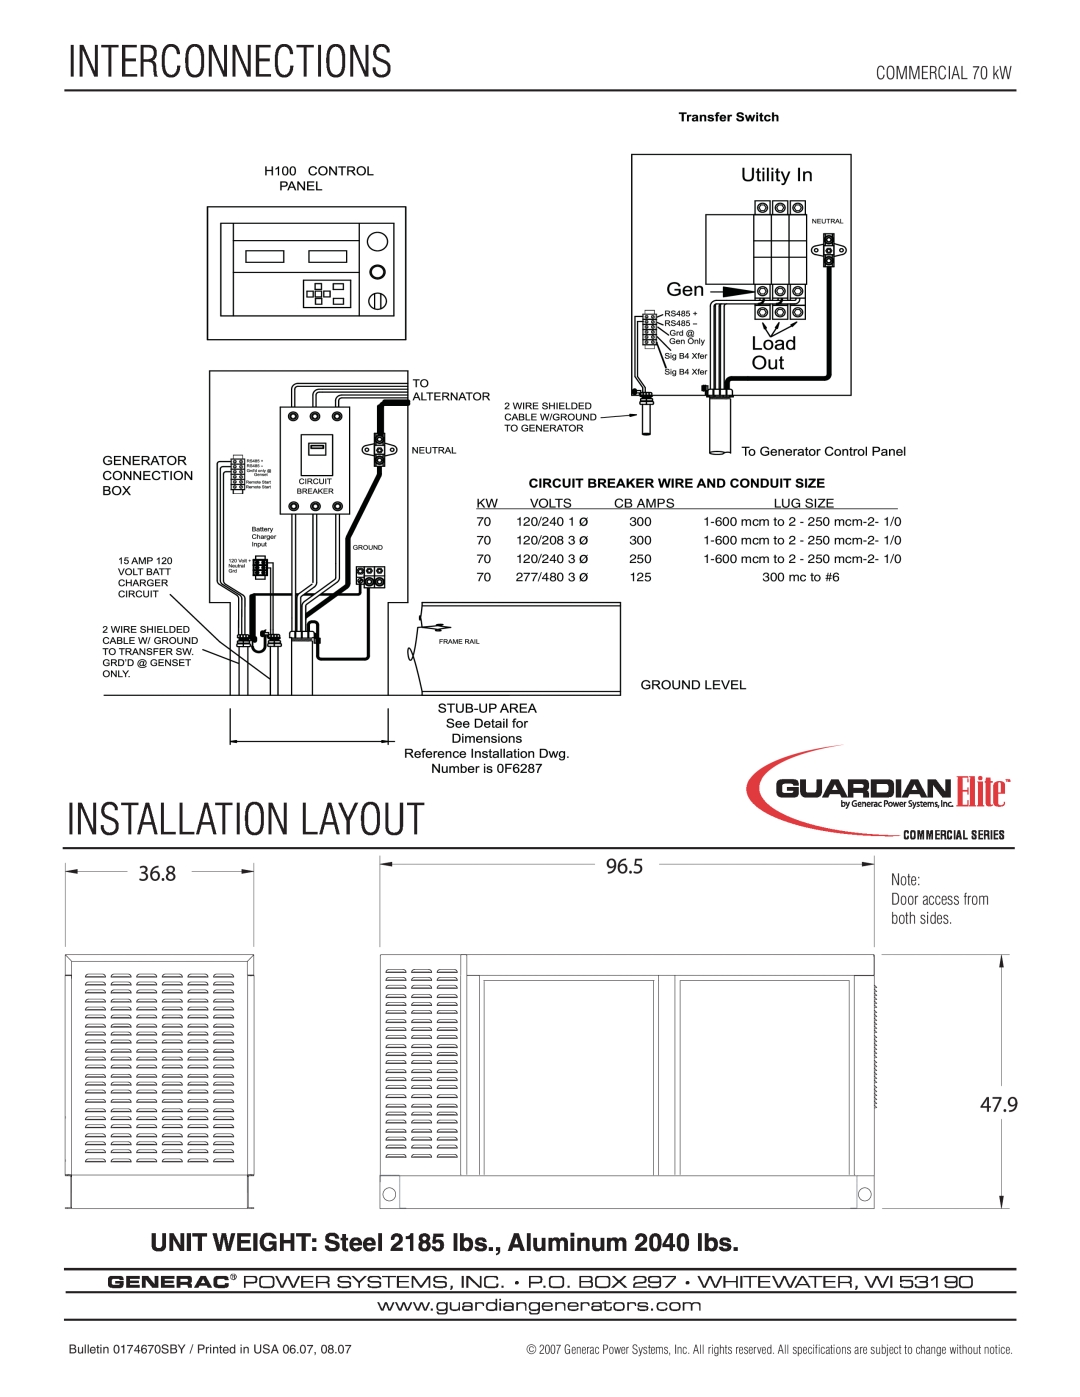 Generac Power Systems UL 2200 manual Interconnections, Installation Layout, UNIT WEIGHT Steel 2185 lbs., Aluminum 2040 lbs 